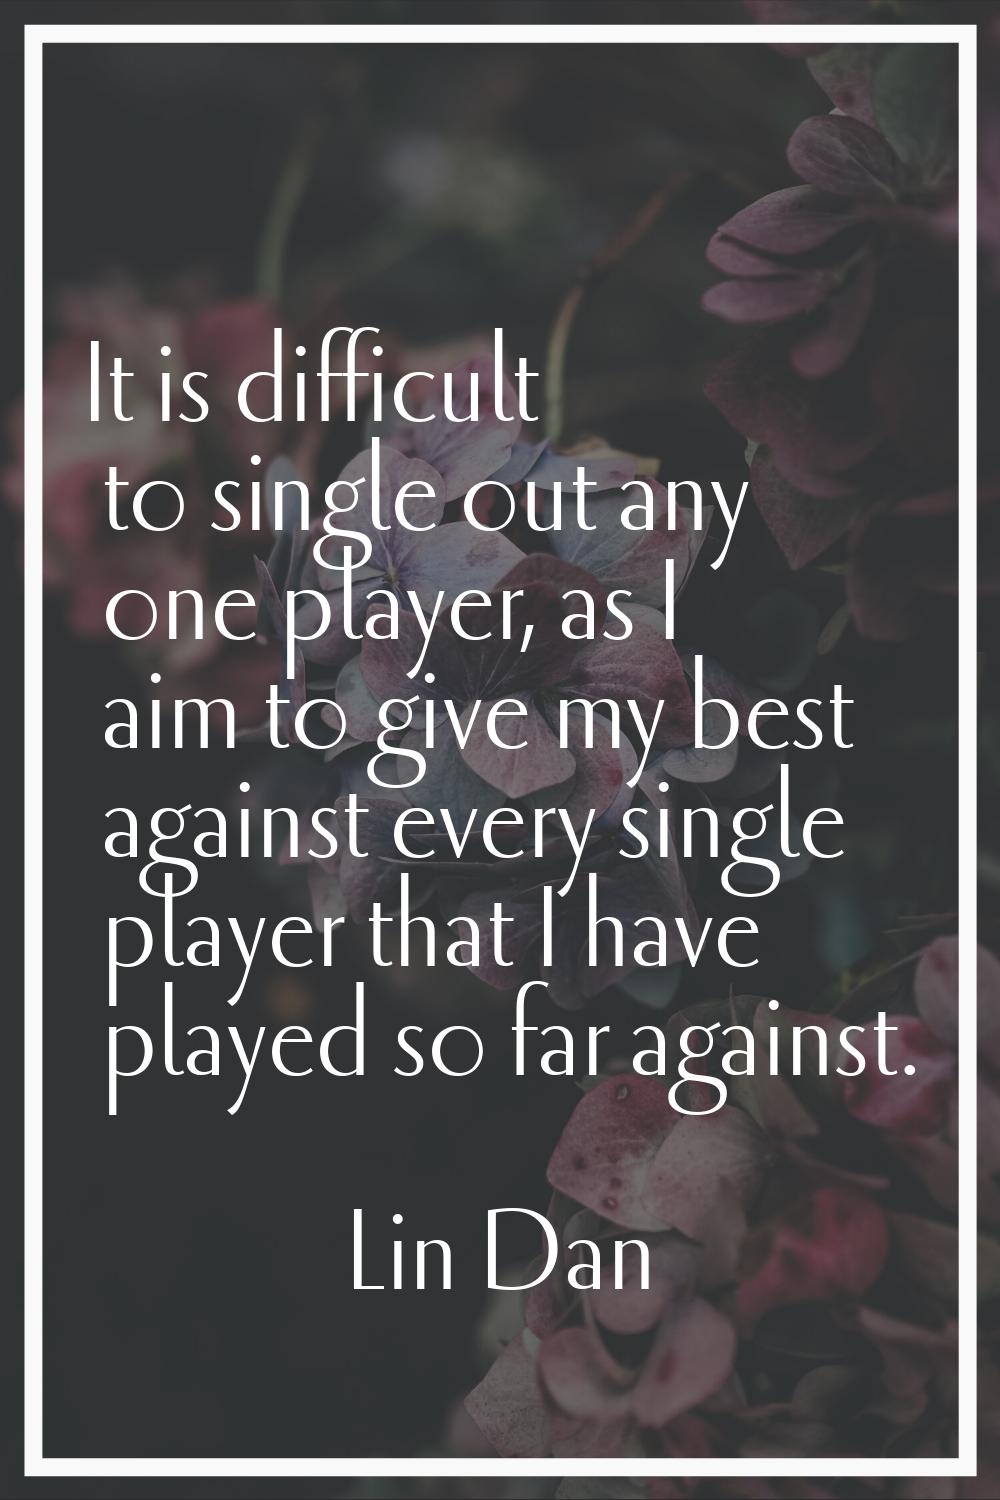 It is difficult to single out any one player, as I aim to give my best against every single player 